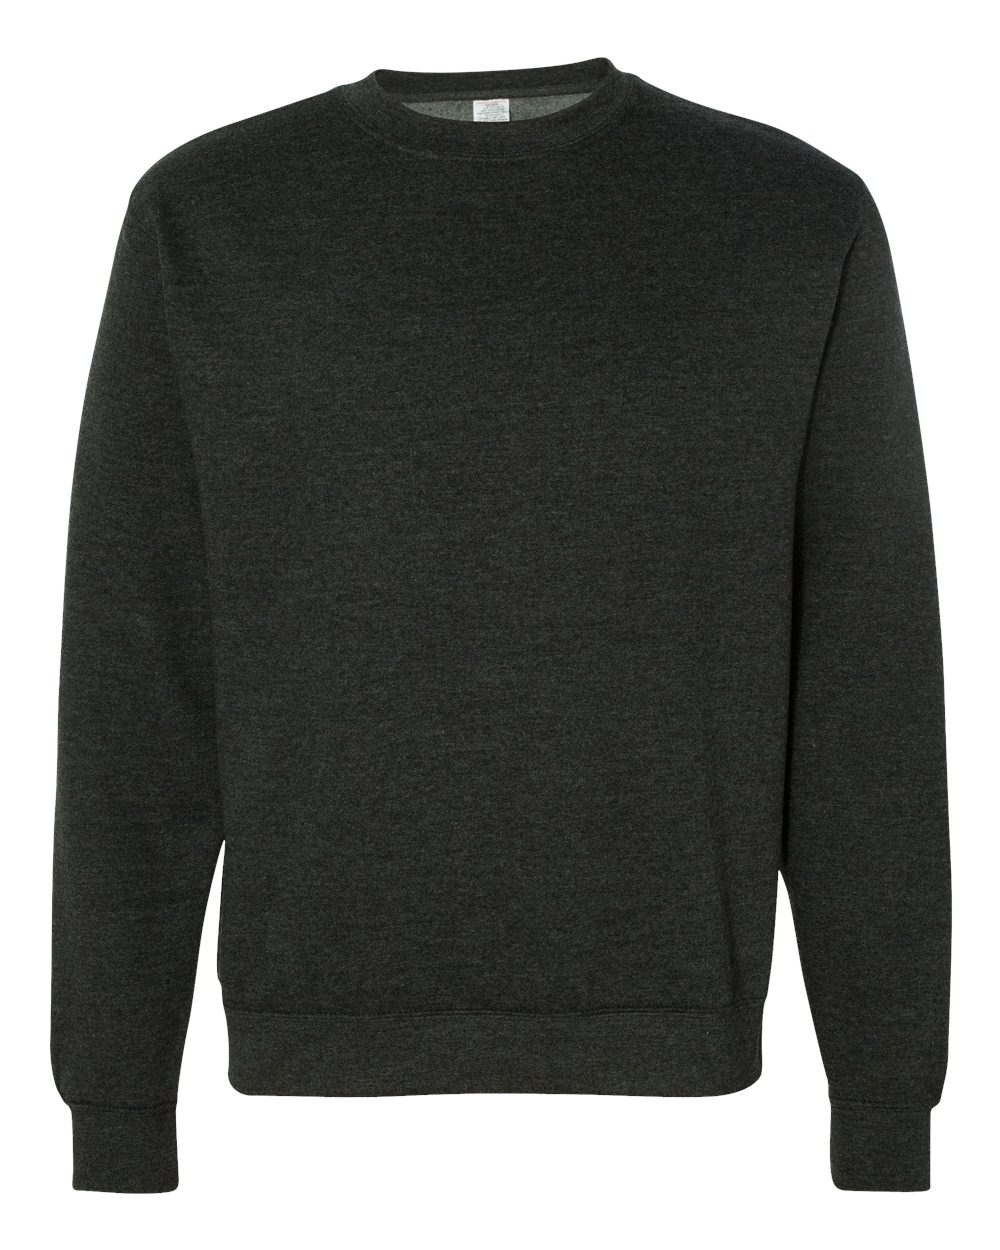 Independent Trading Co. SS3000 | Midweight Sweatshirt | ShirtSpace